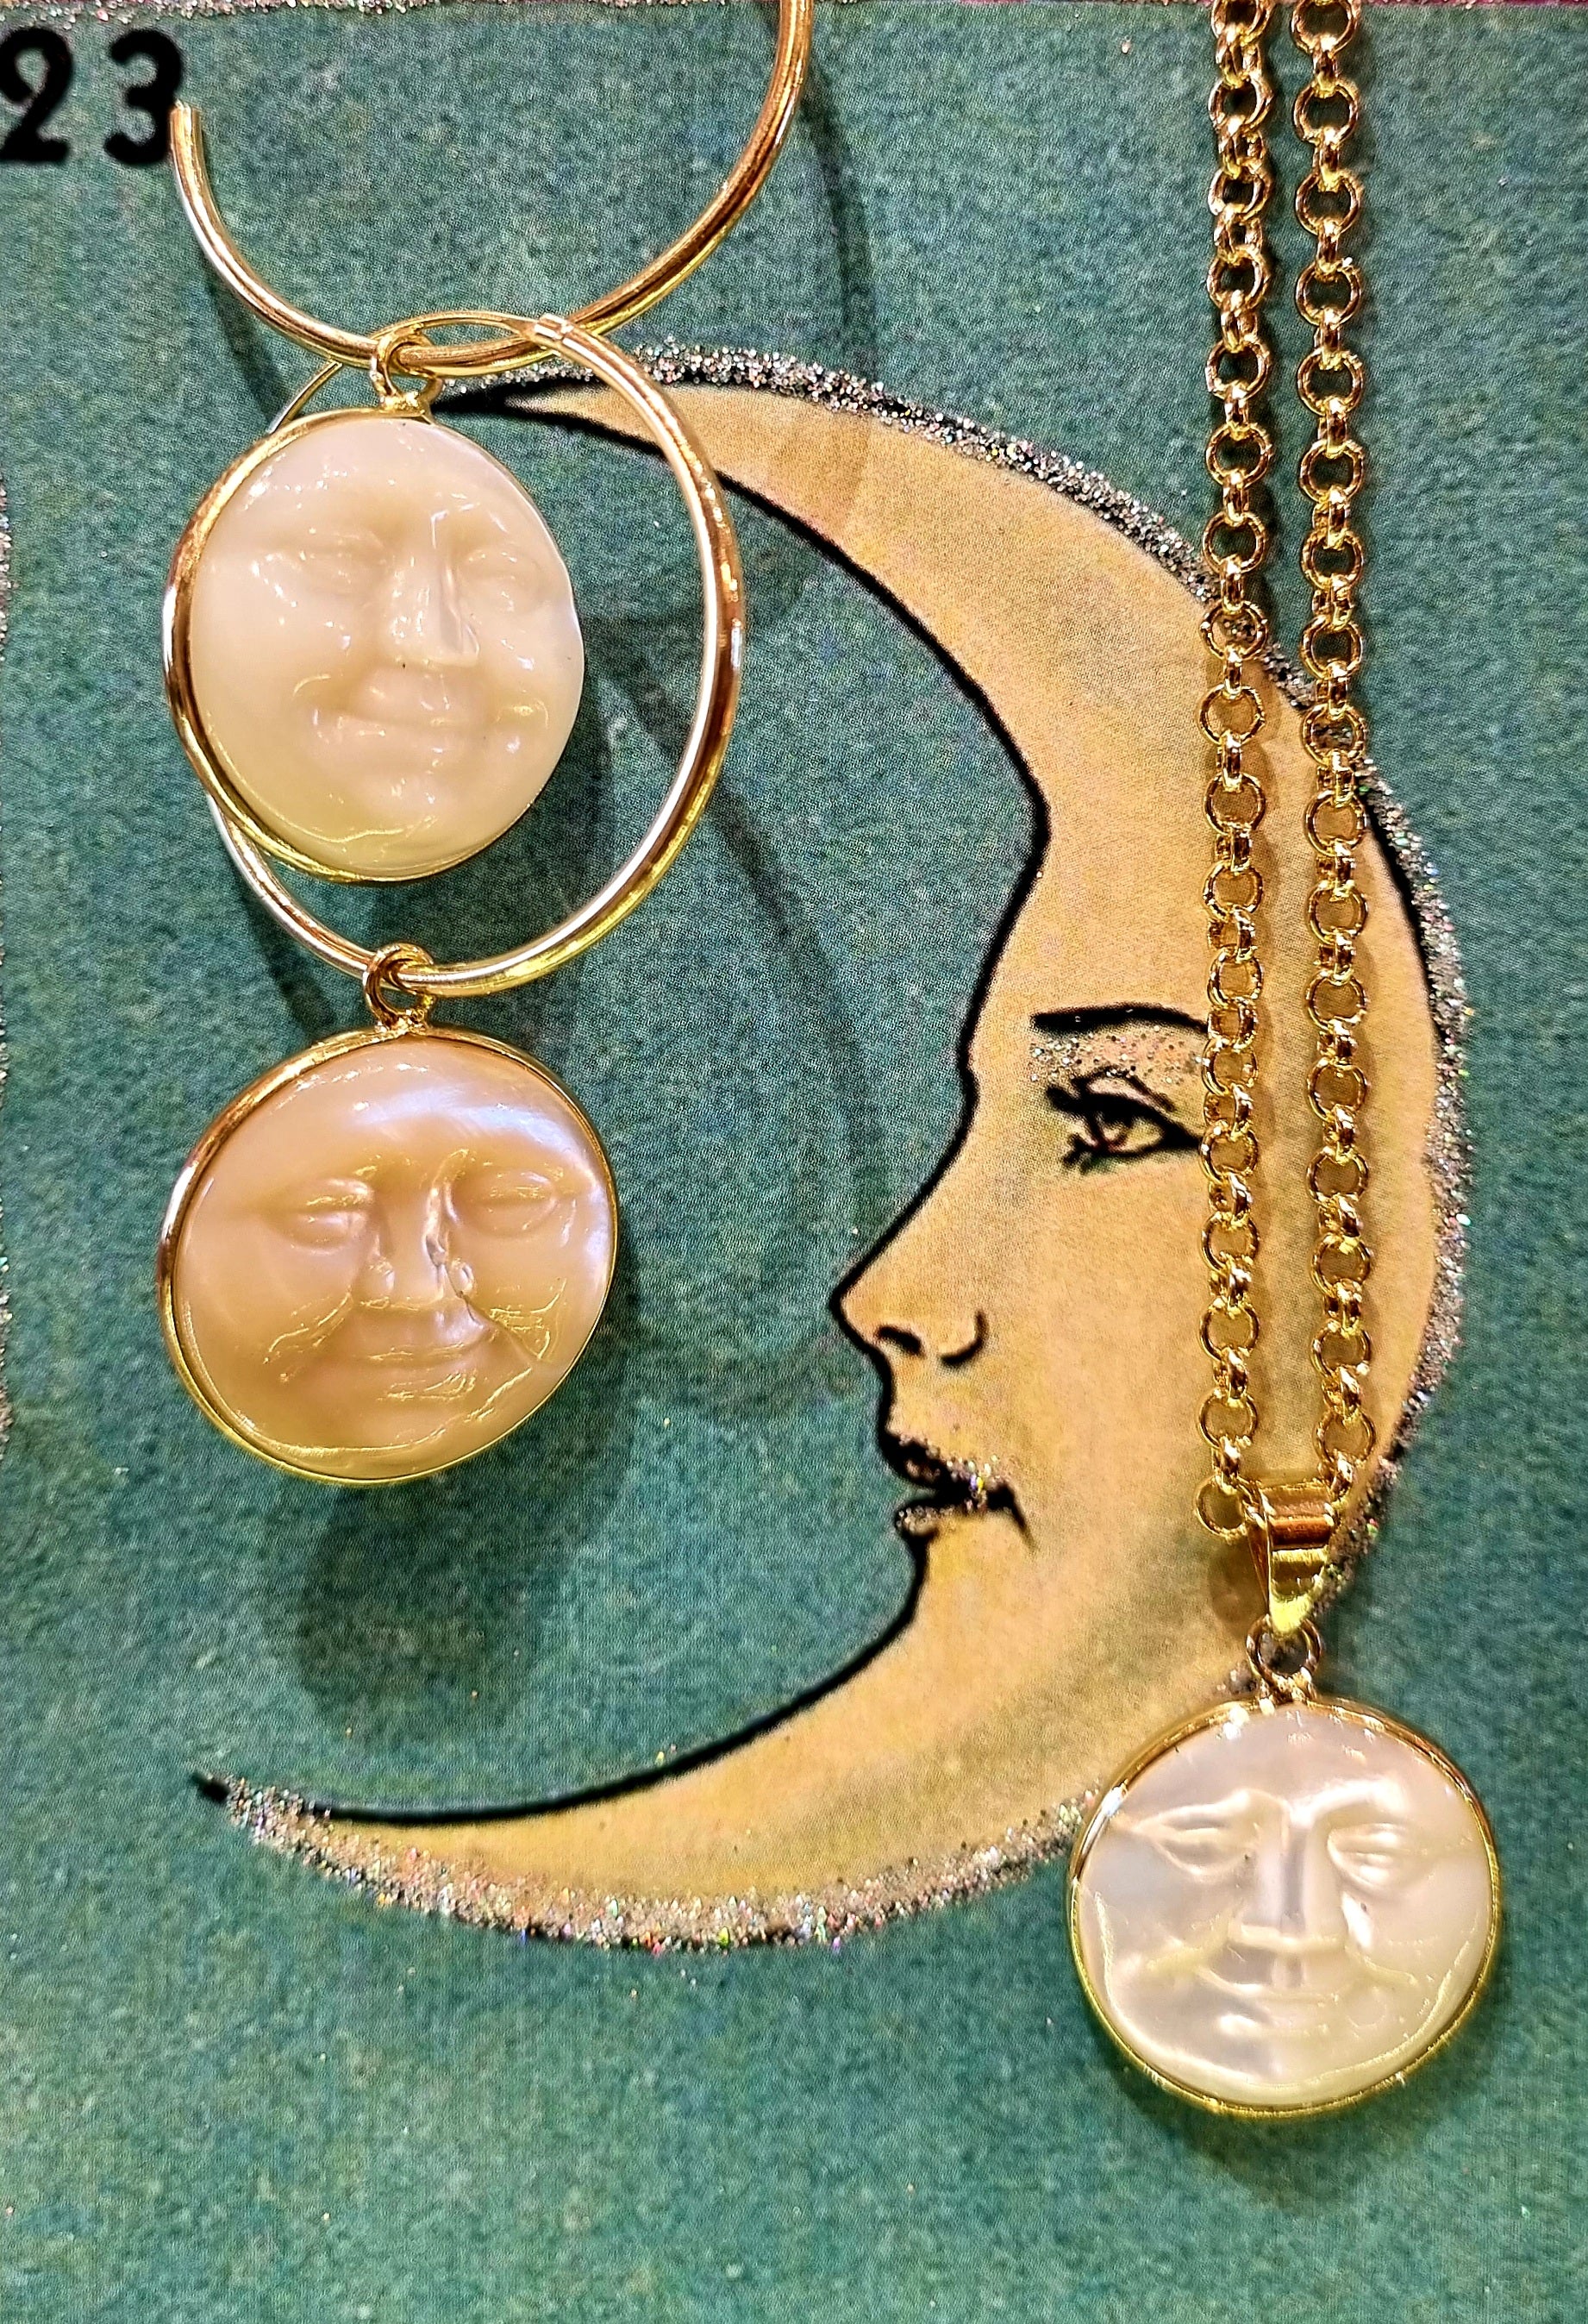 Full moon carved mother of pearl earrings and necklace